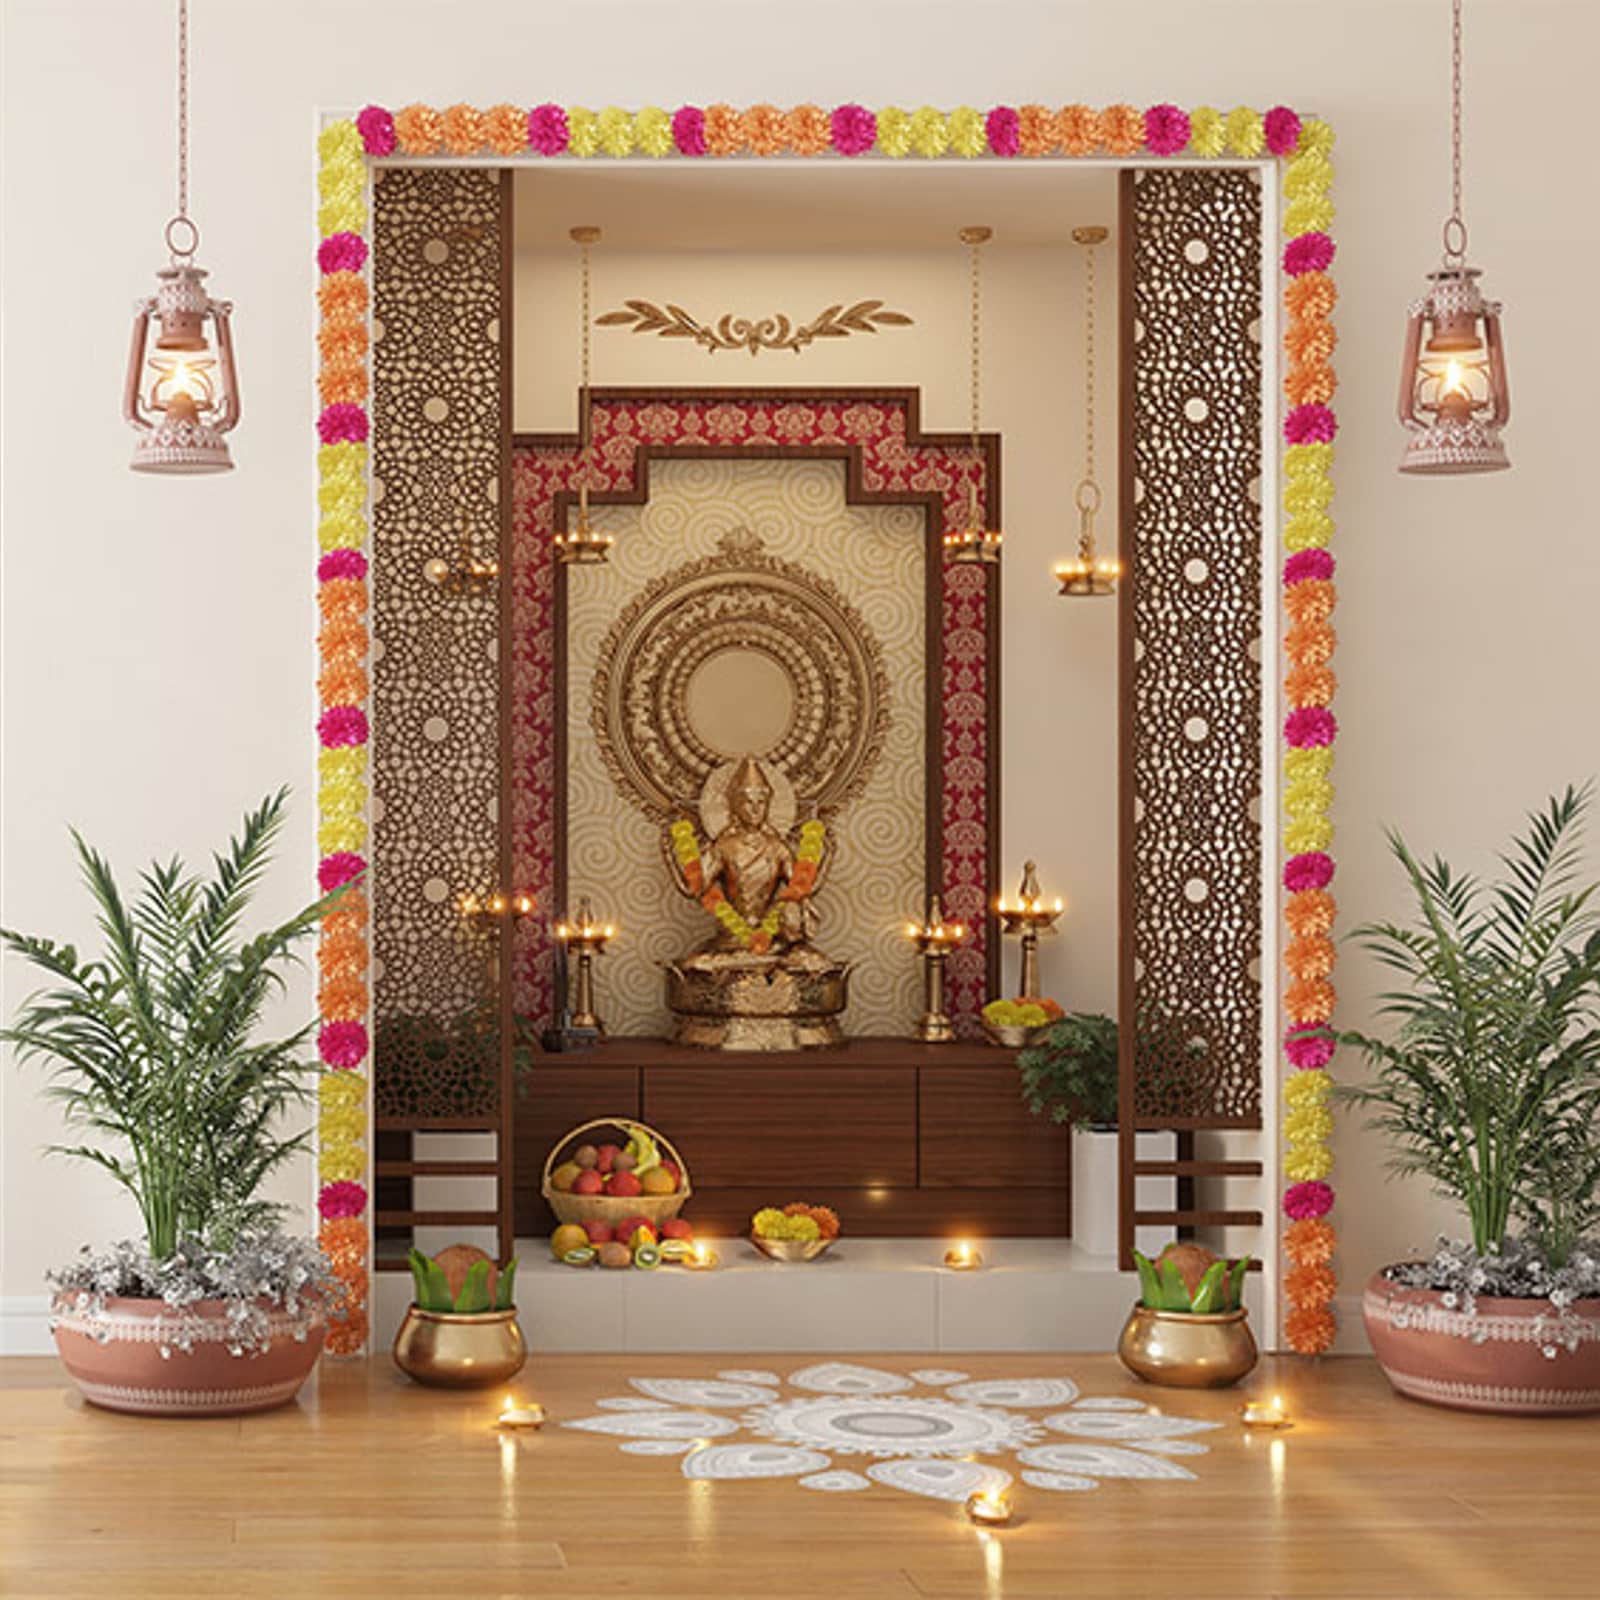 Navratri Decorations: DIY Home Decor Tips That You Have To Try ...